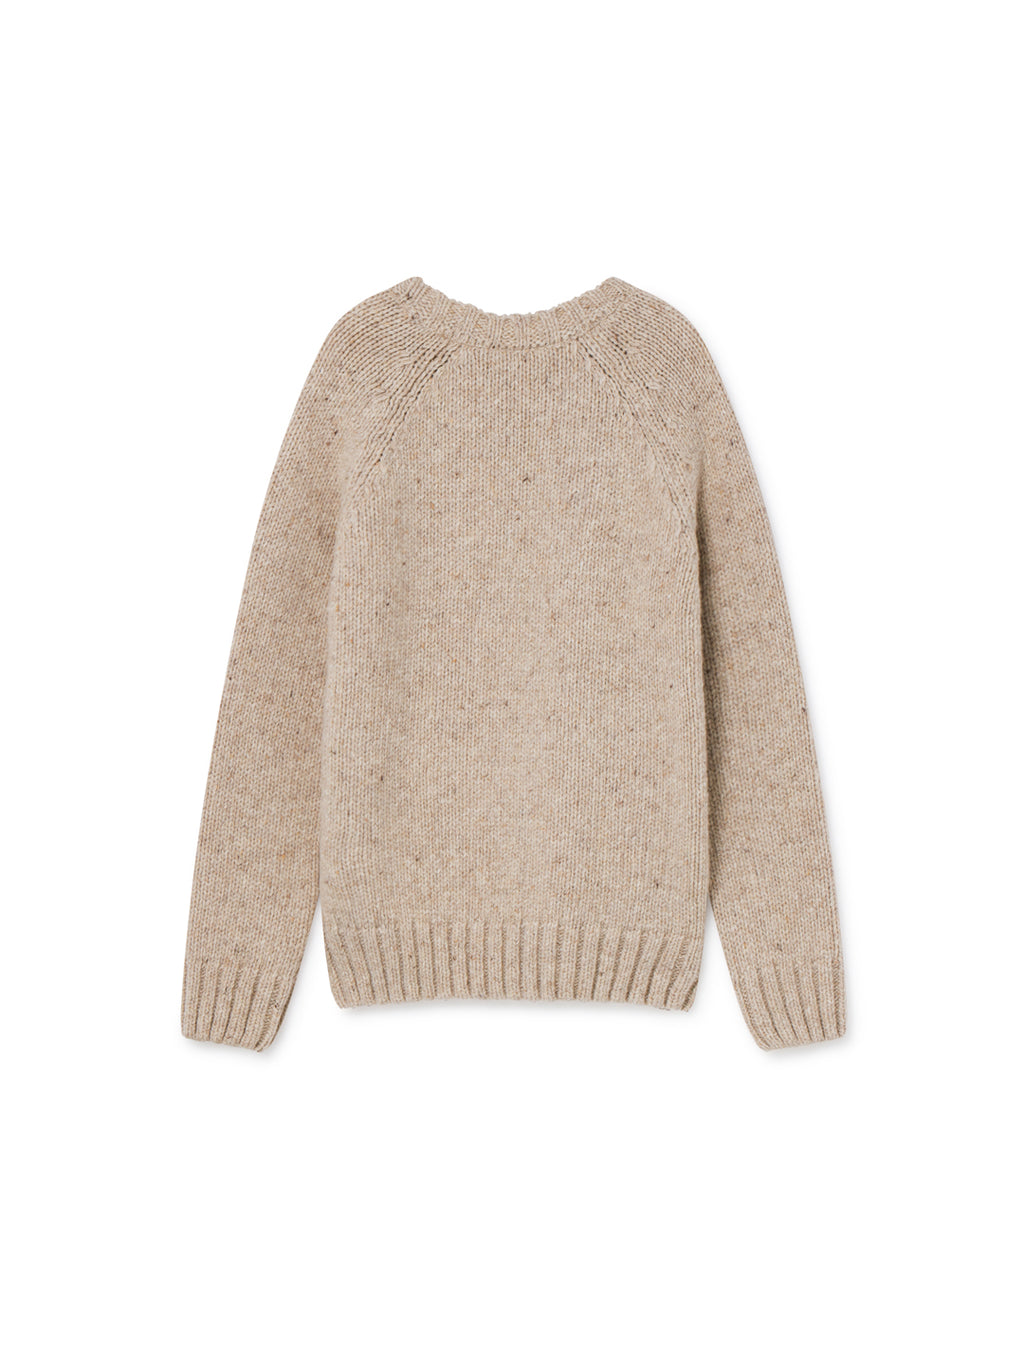 Rusa Knit – TWOTHIRDS